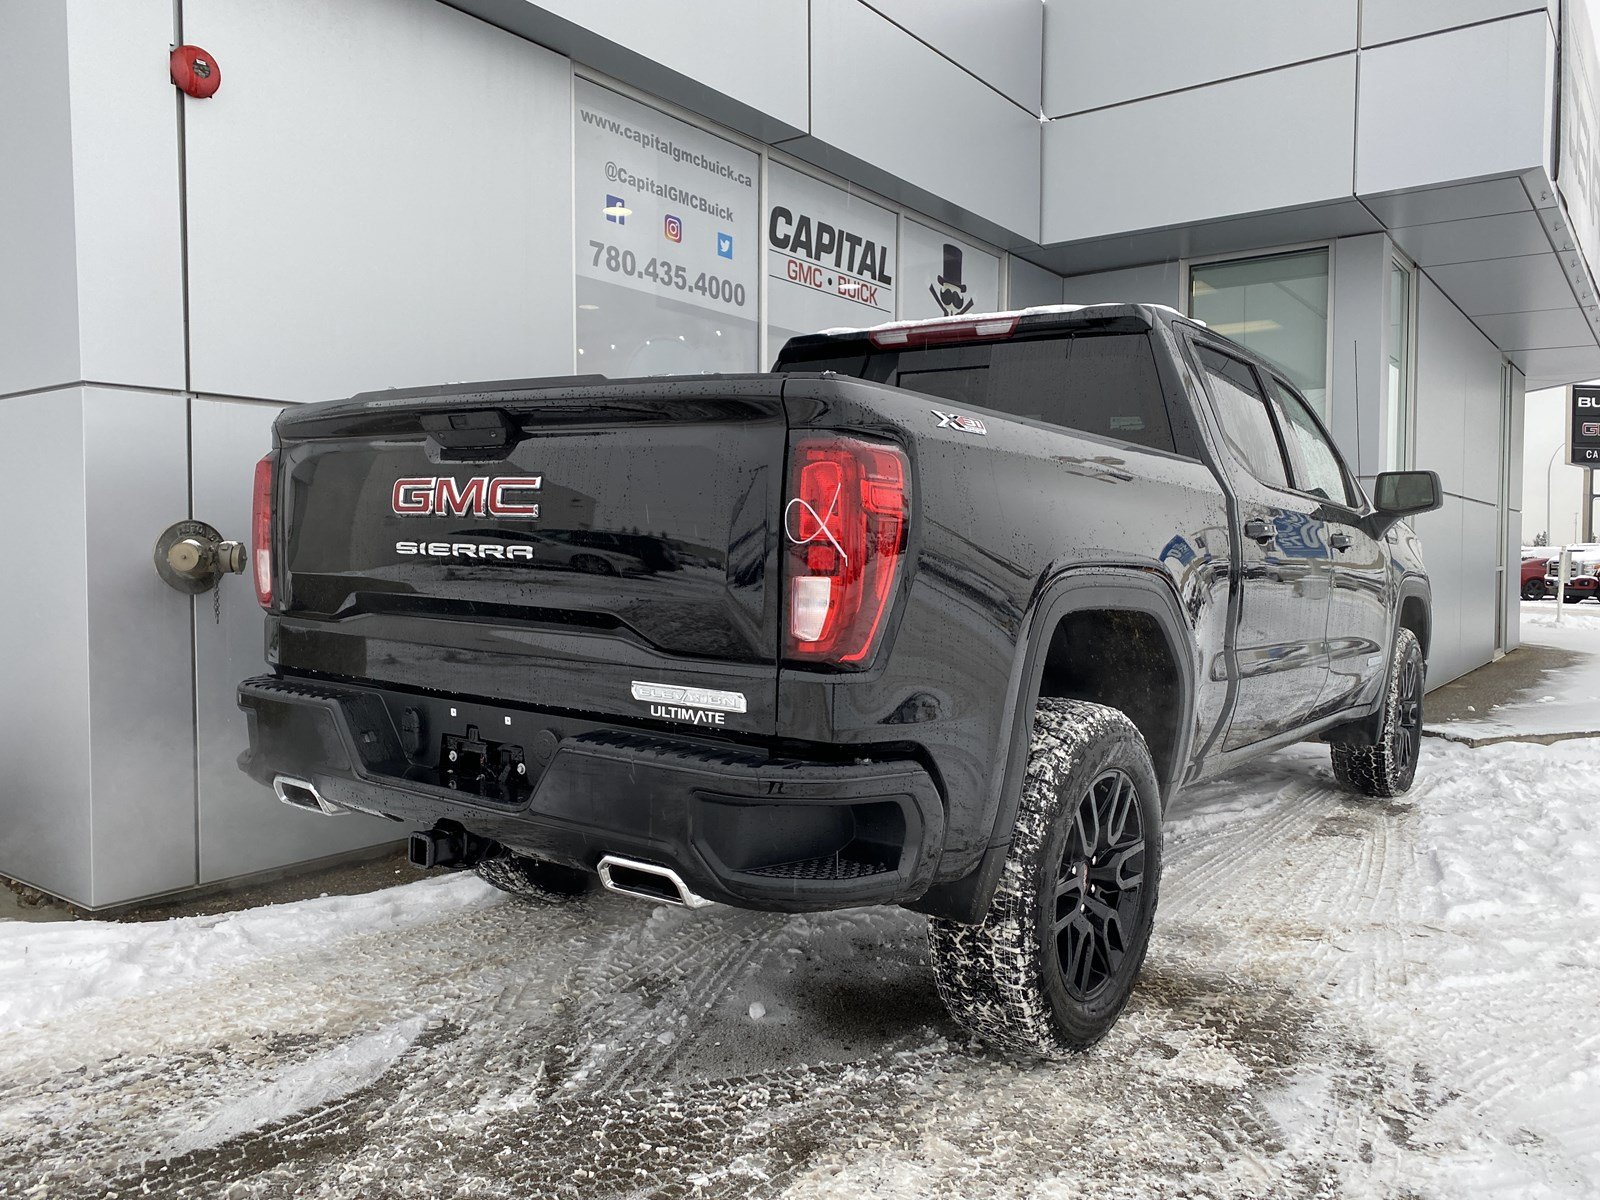 New 2020 Gmc Sierra 1500 Crew Cab Elevation Ultimate Crew Cab Pickup In